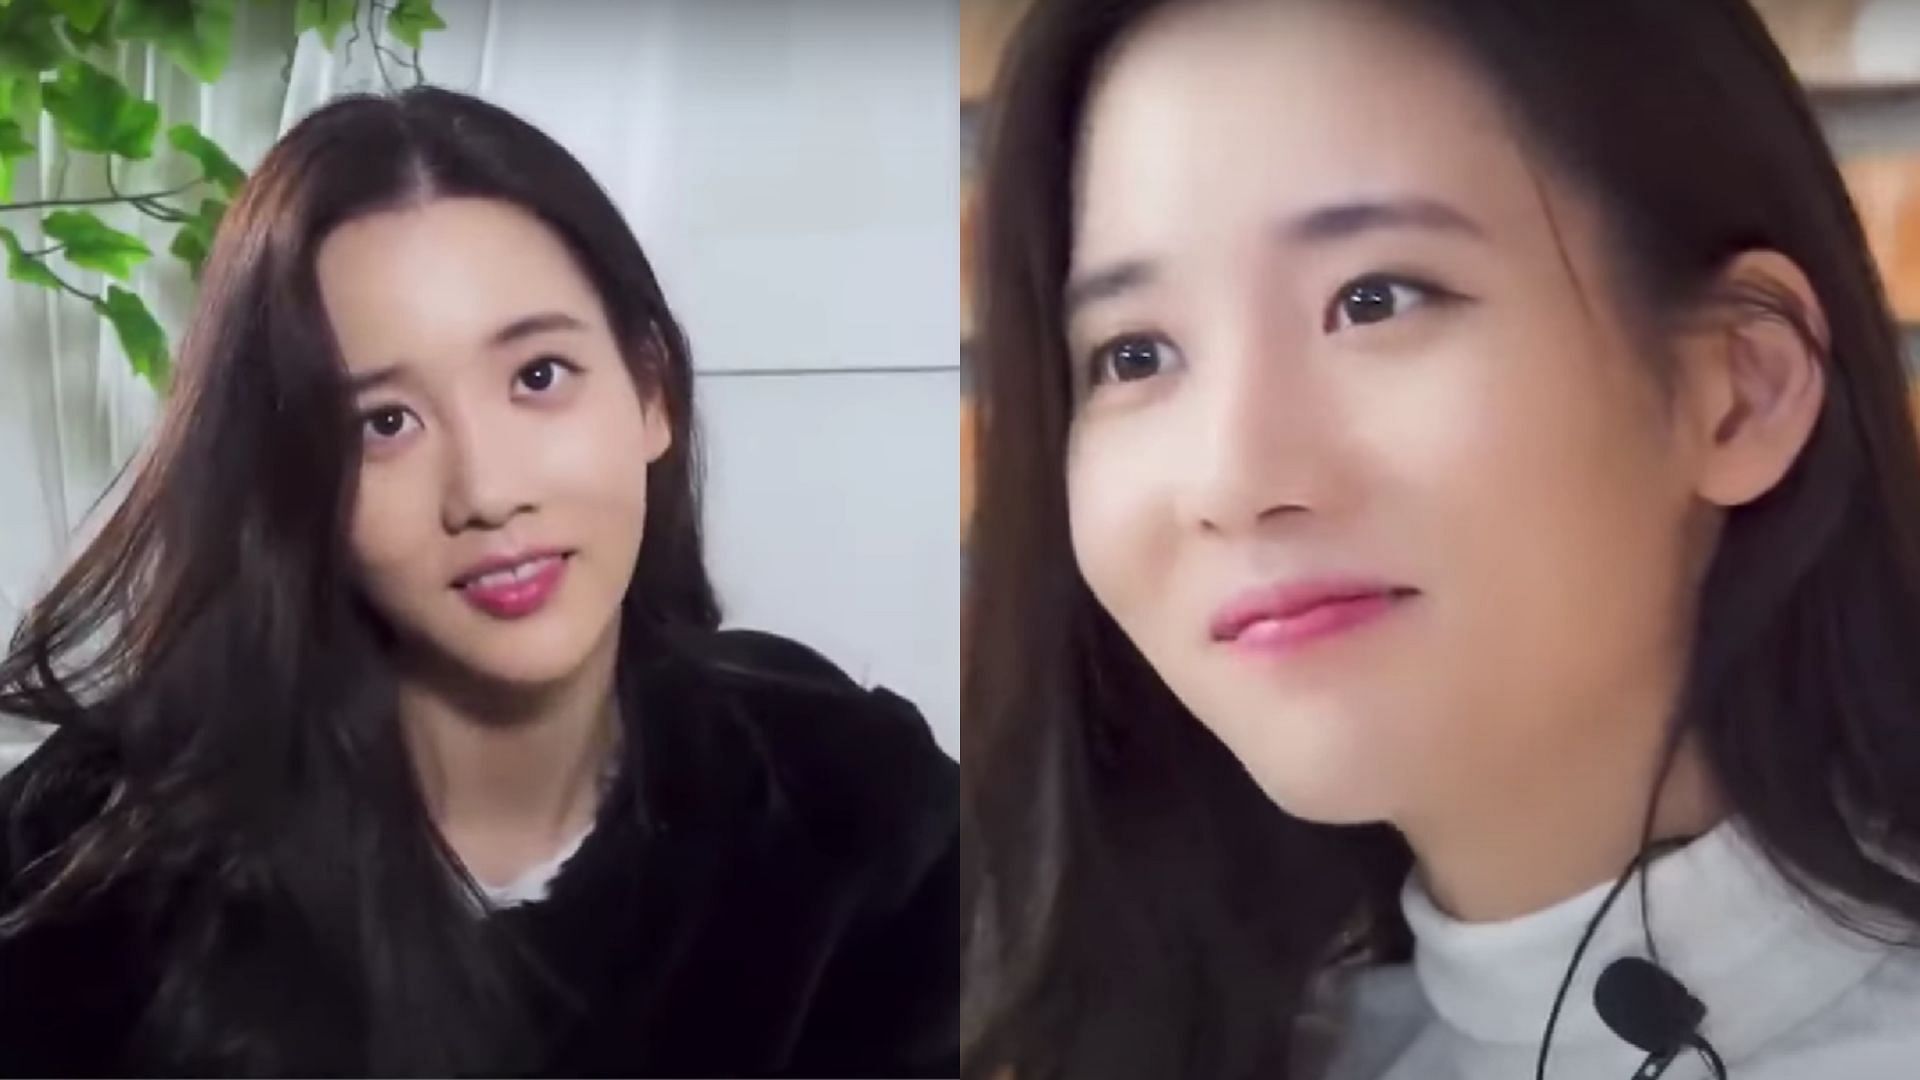 Han Seo-hee gives rise to controversy again (Images via YouTube)